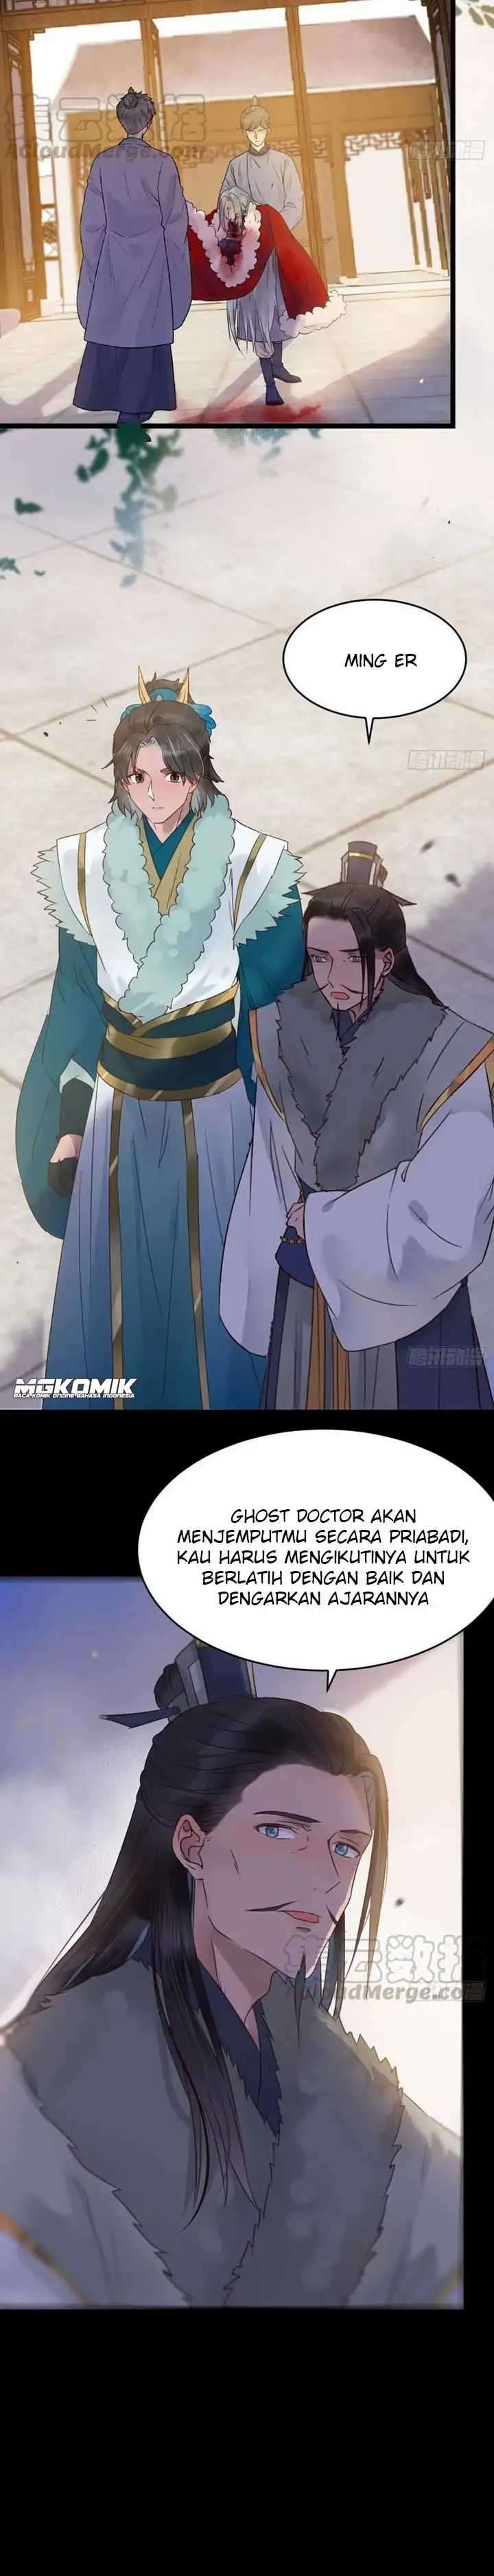 The Ghostly Doctor Chapter 376 5